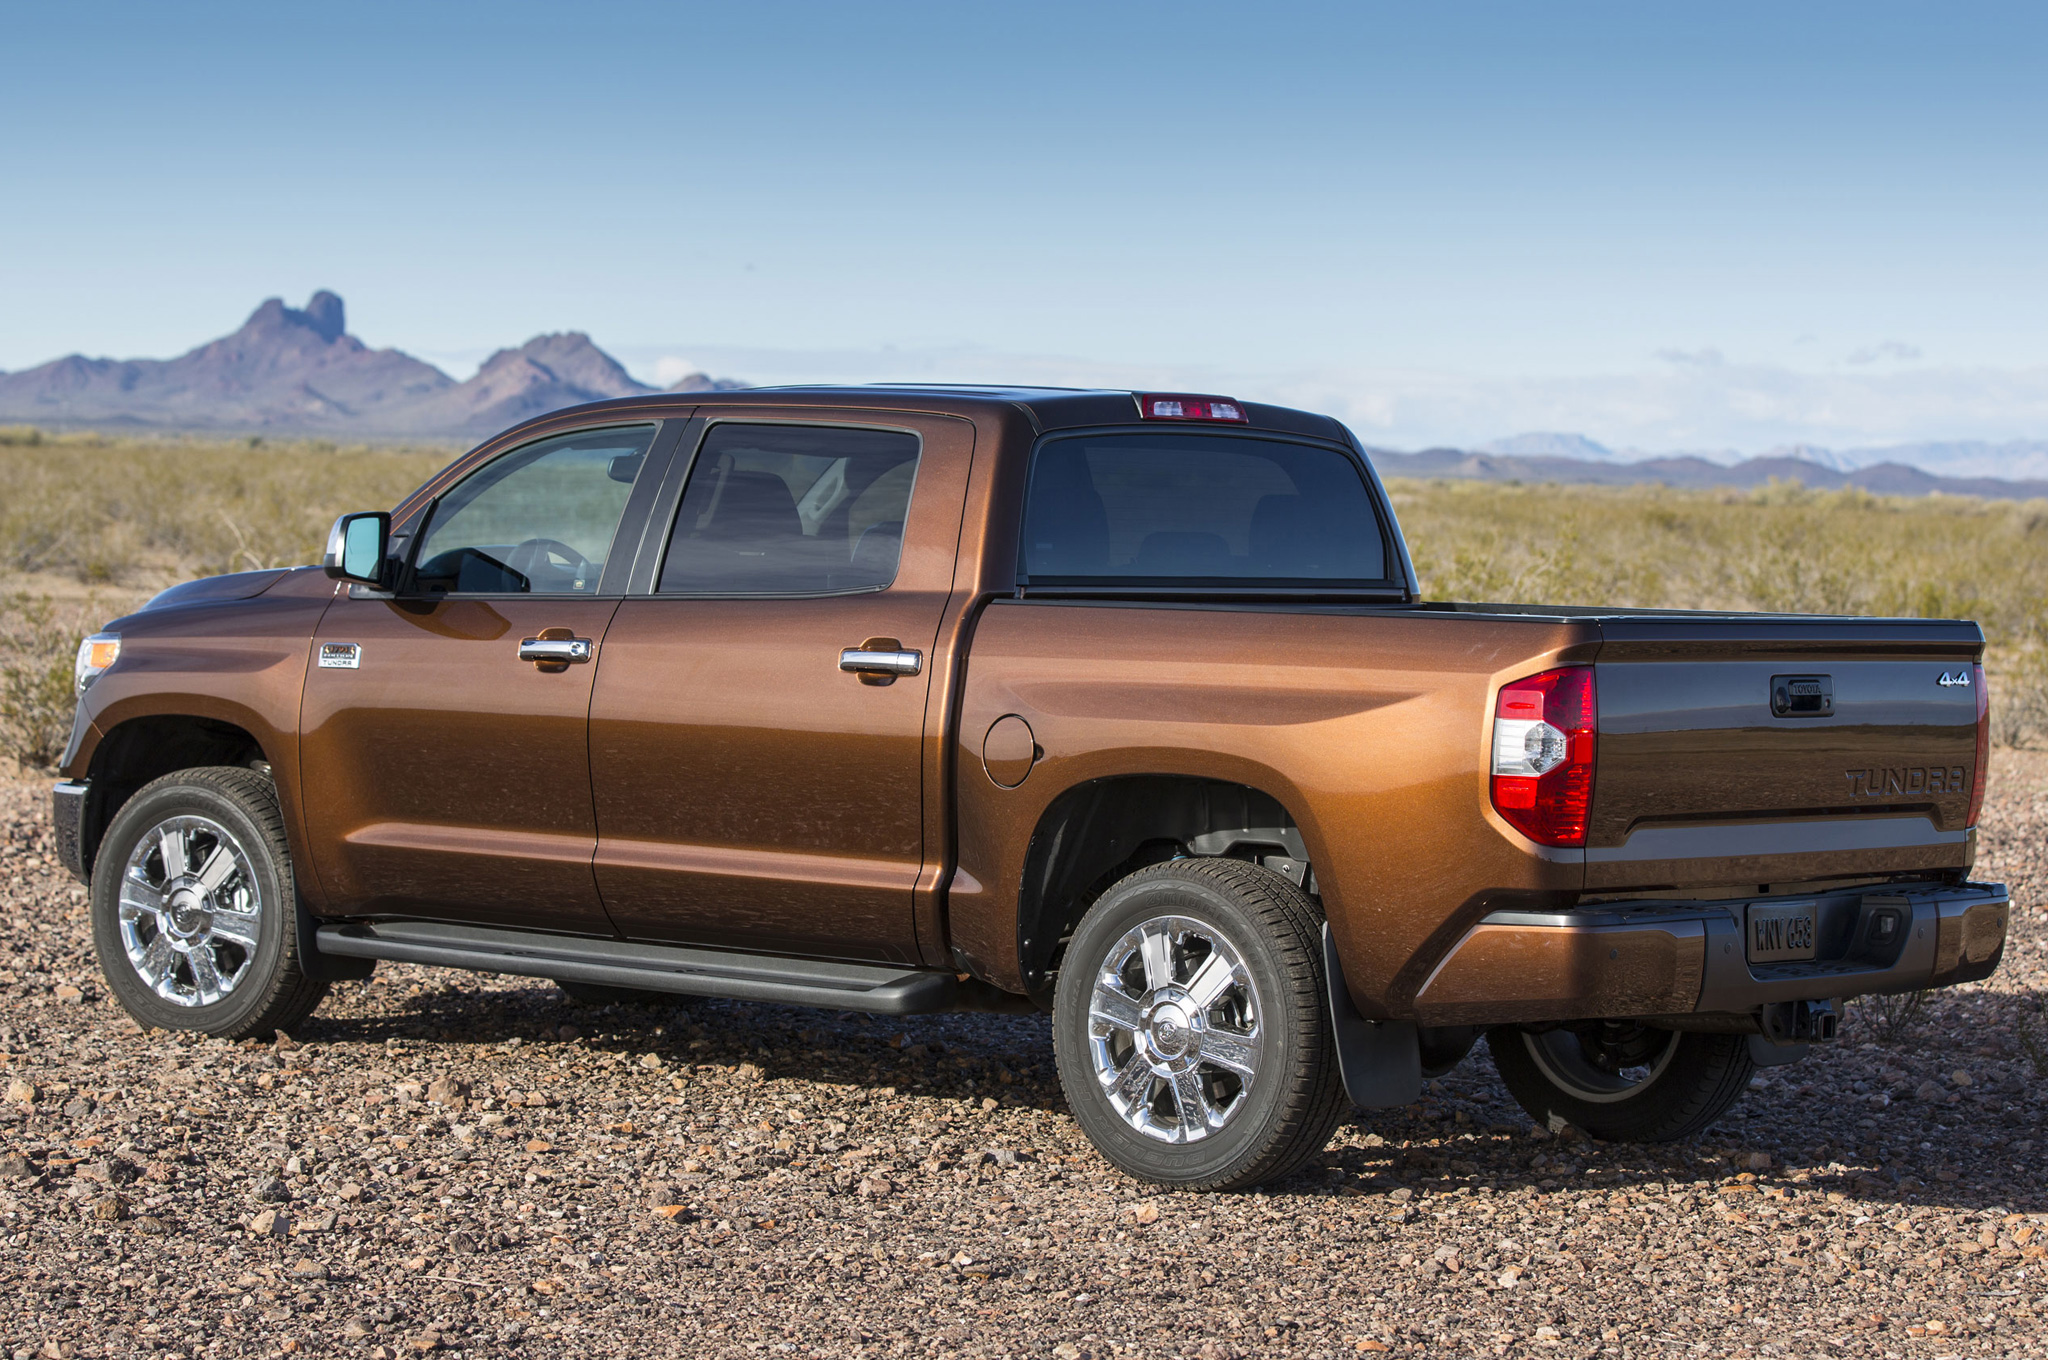 2014 Toyota Tundra Rear Side View